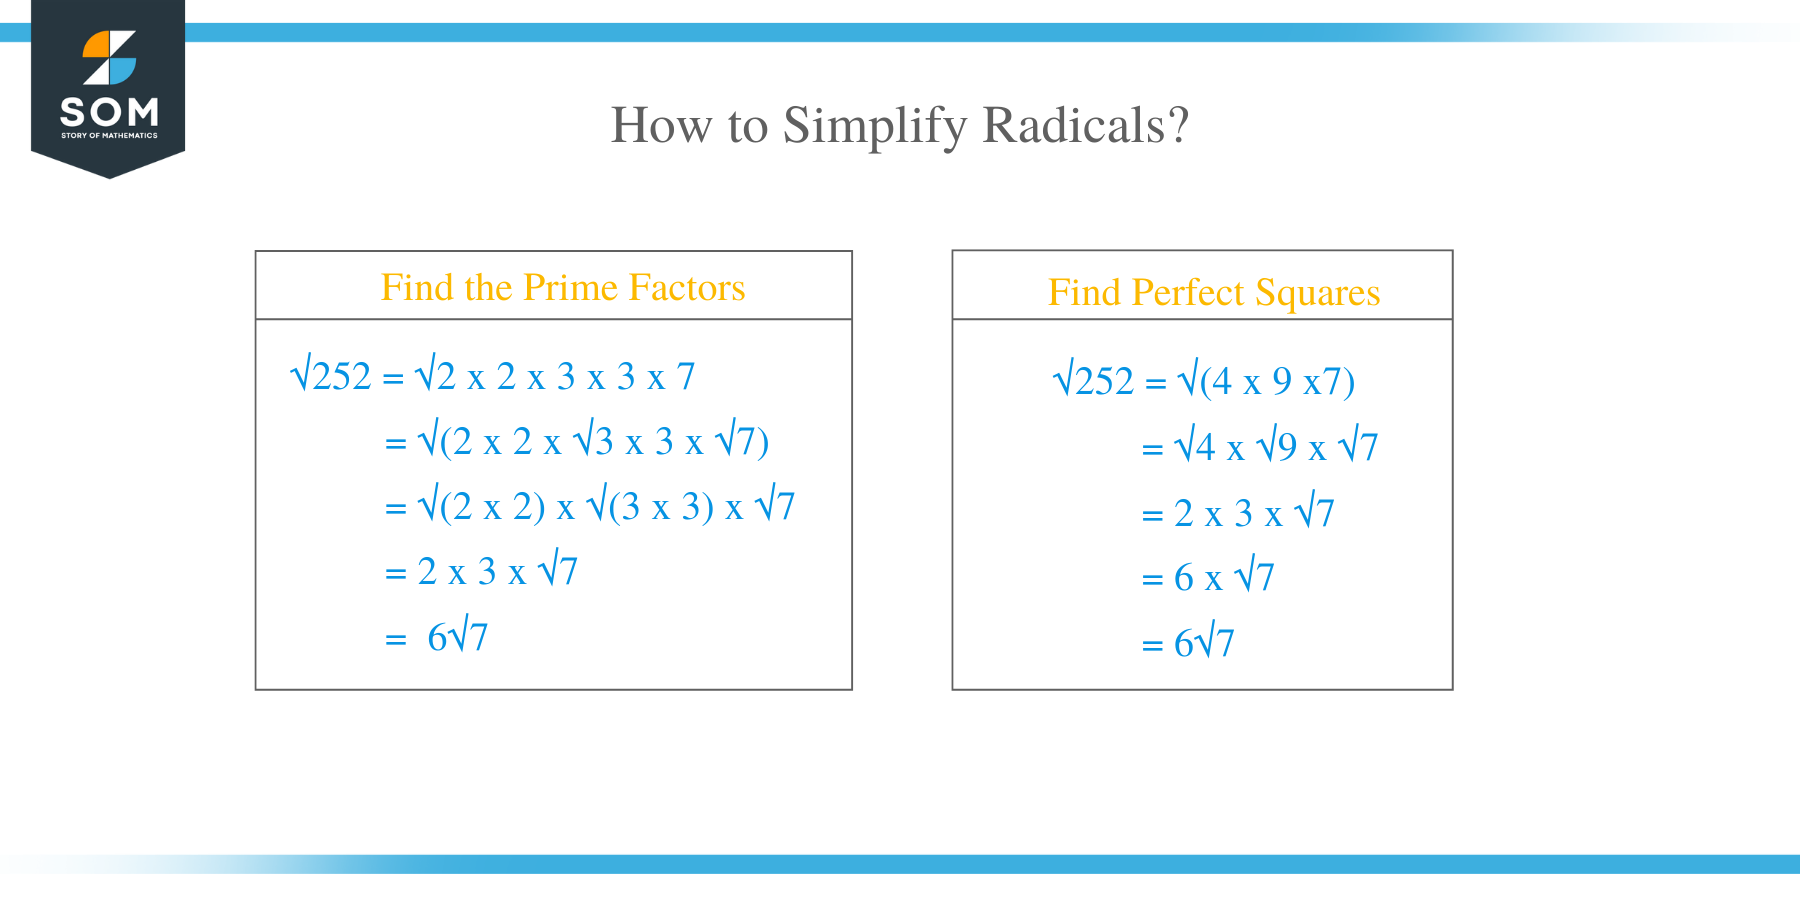 How to Simplify Radicals?